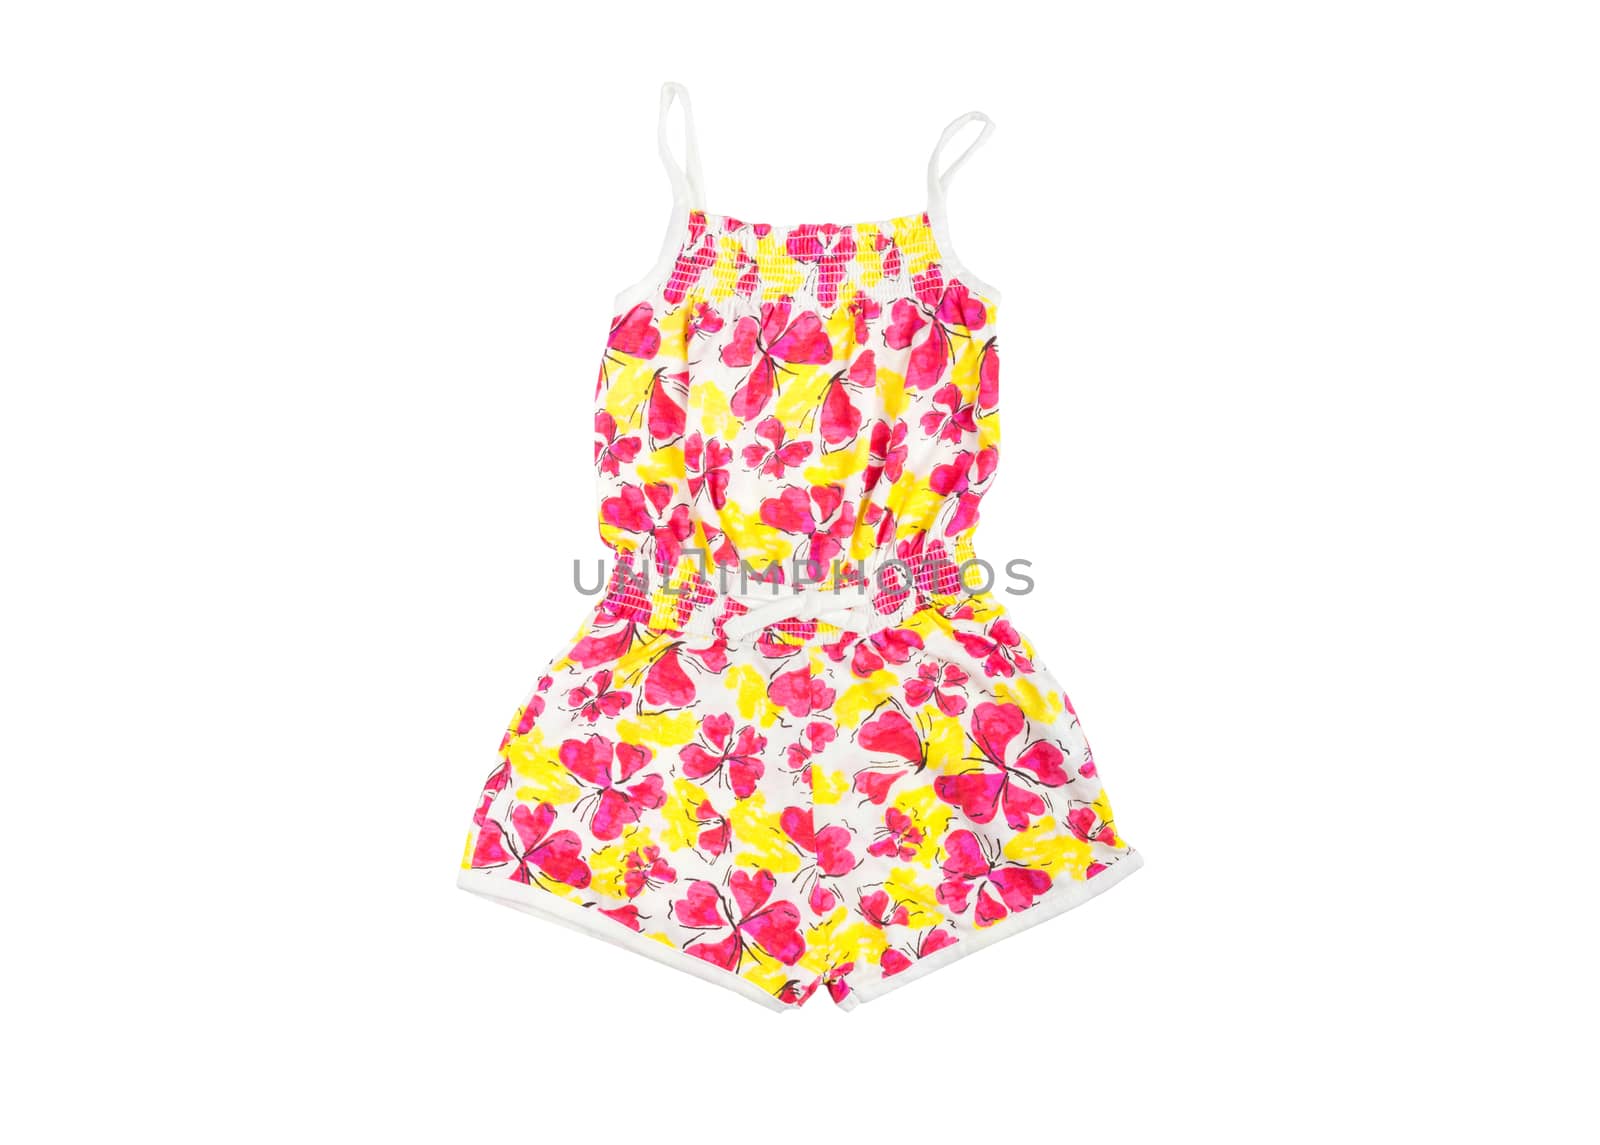 Children's bright new trendy flowered jumpsuit isolated on white background